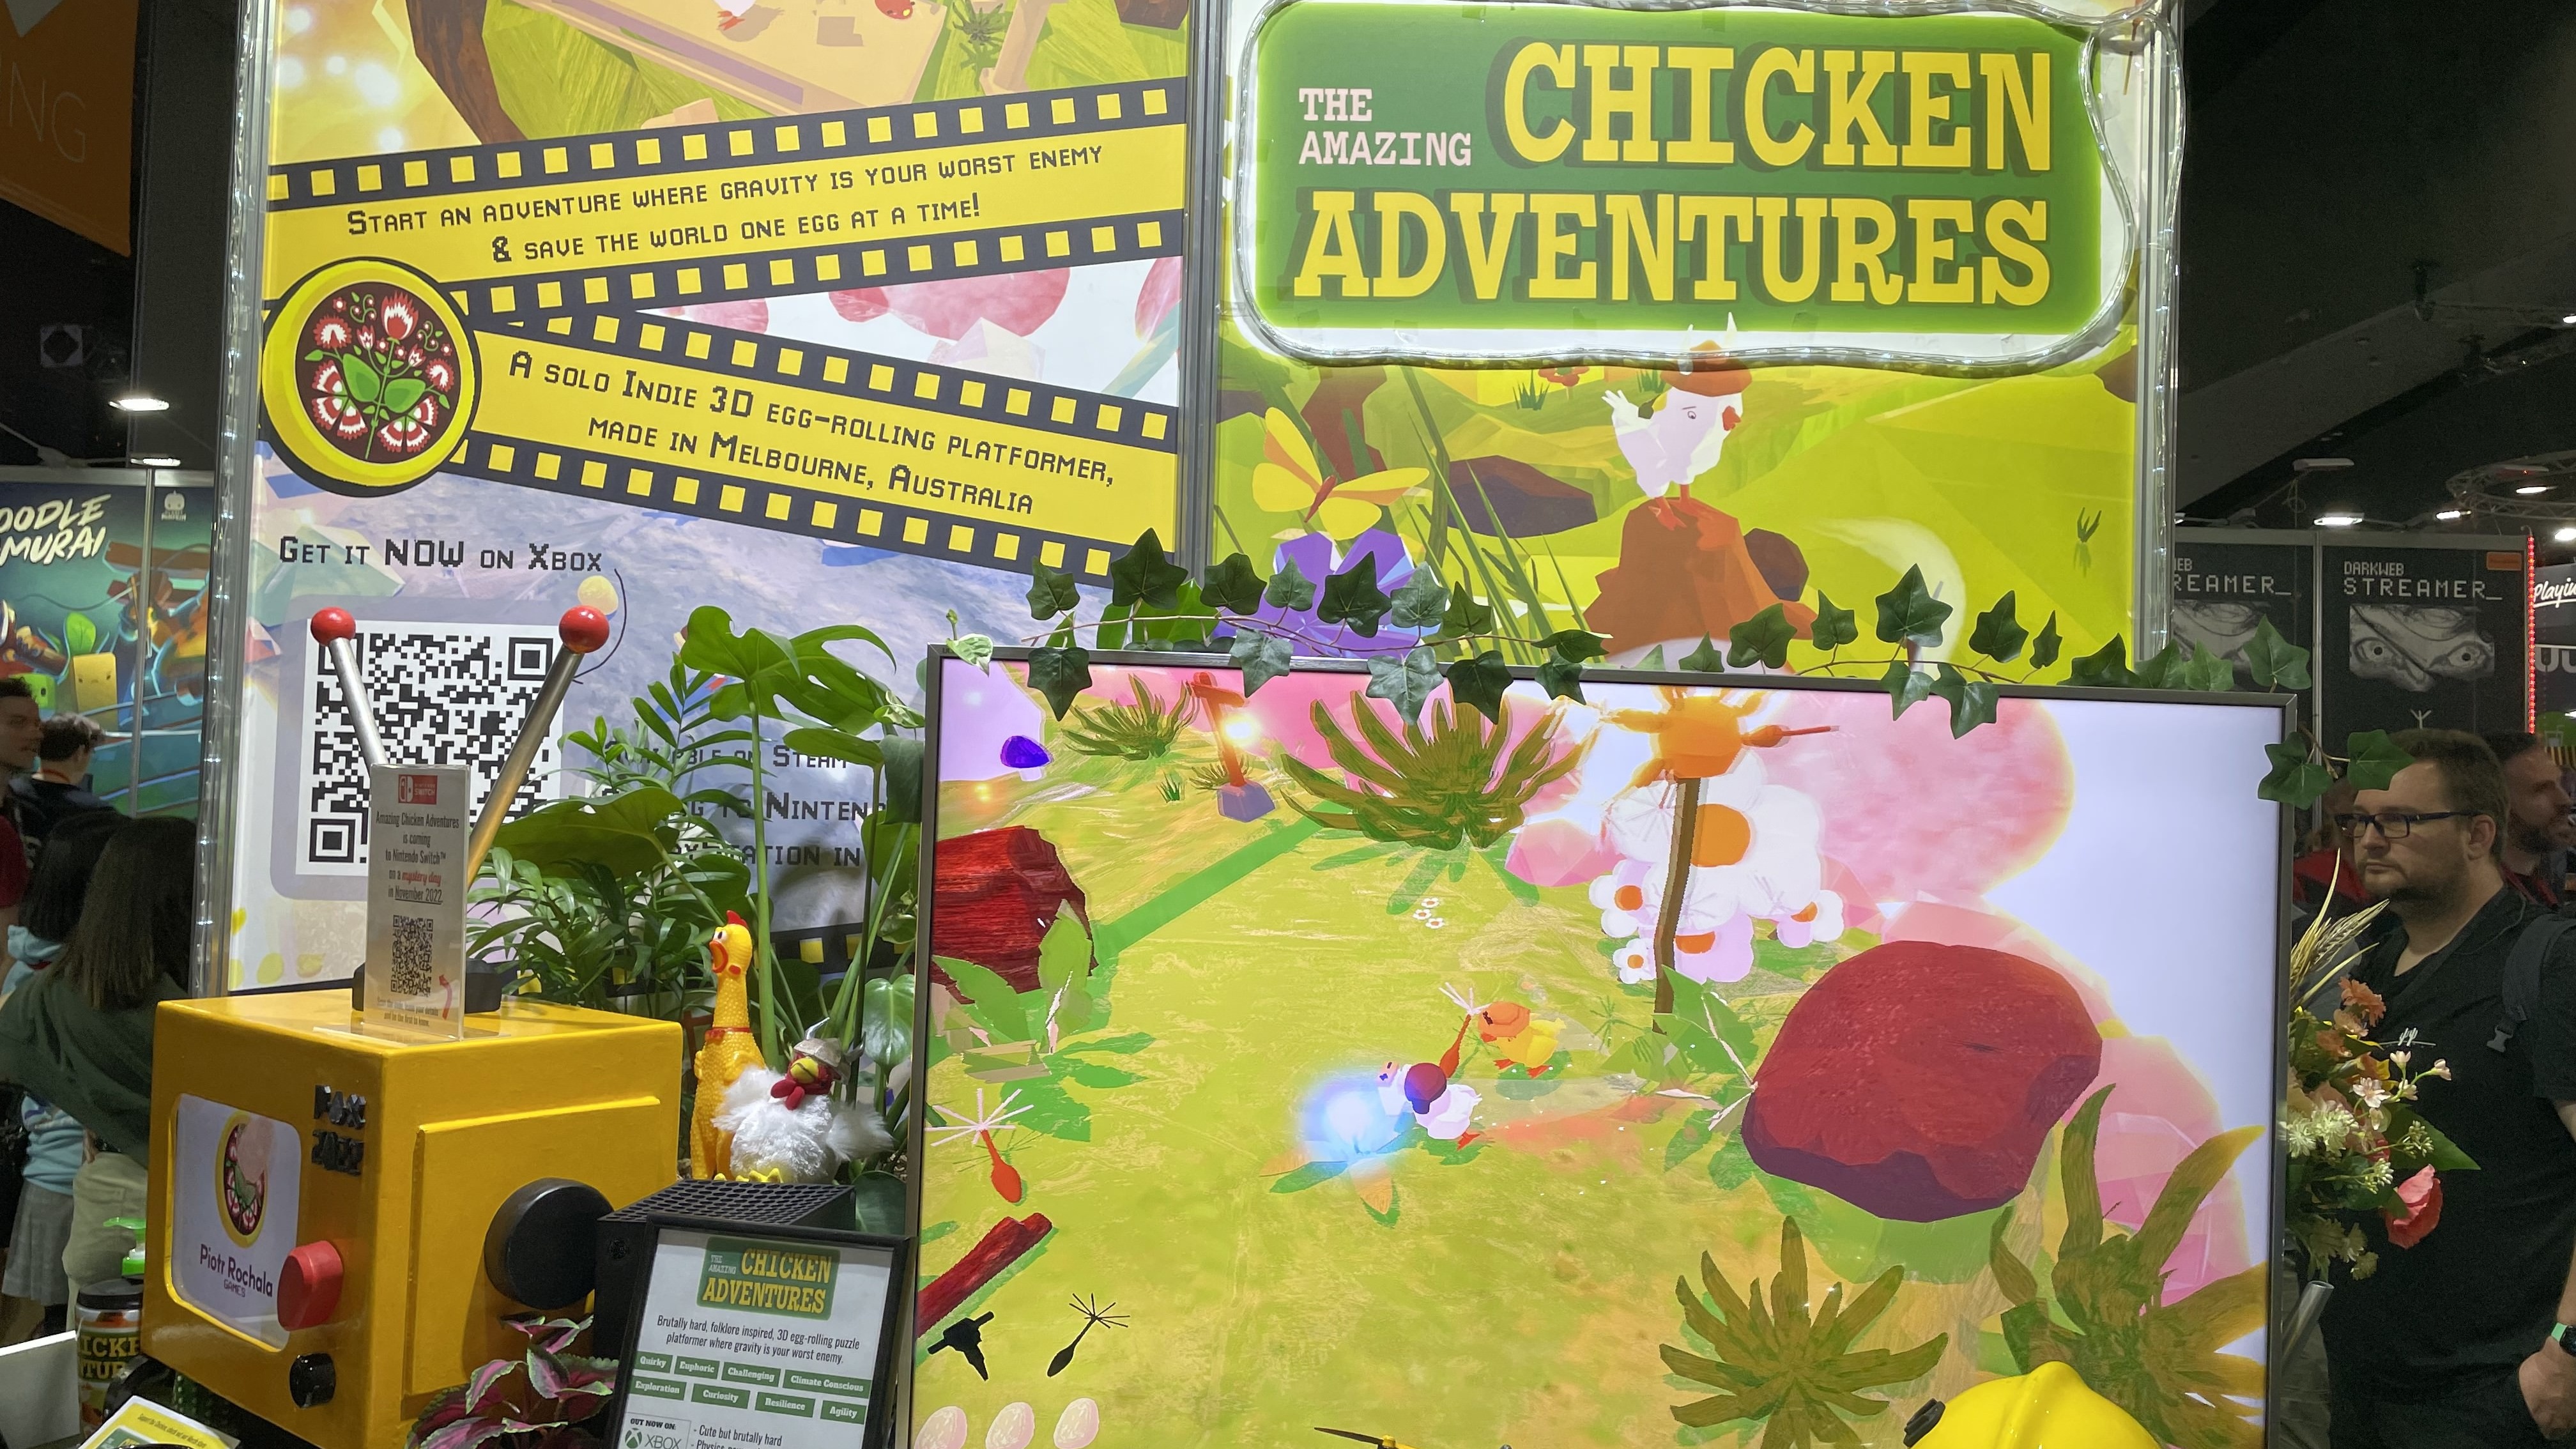 The newly released Amazing Chicken Adventures was on display at PAX Aus 2022.